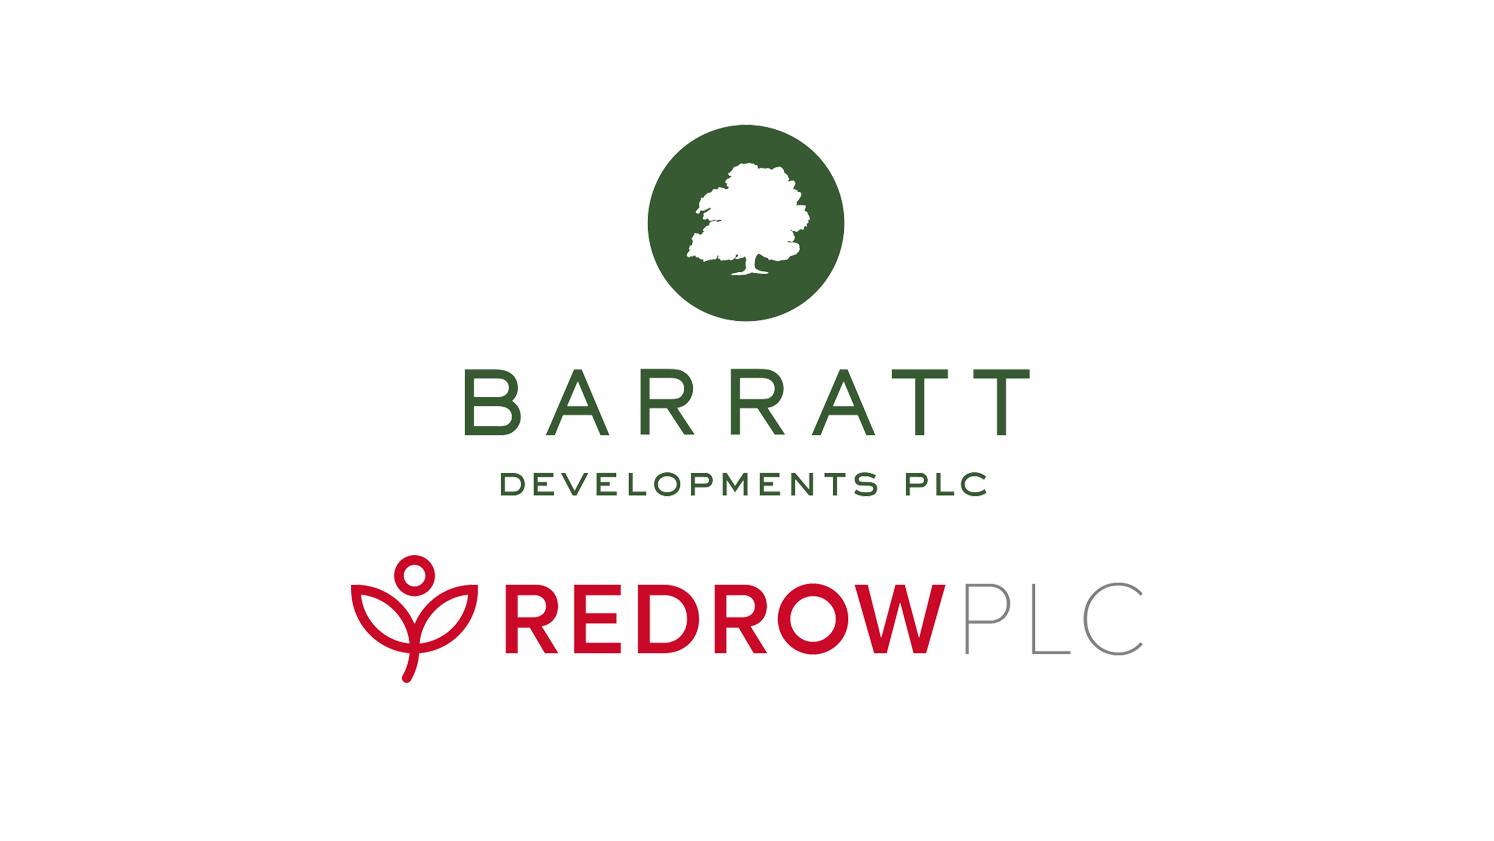 Barratt set to acquire Redrow in a £2.5bn deal